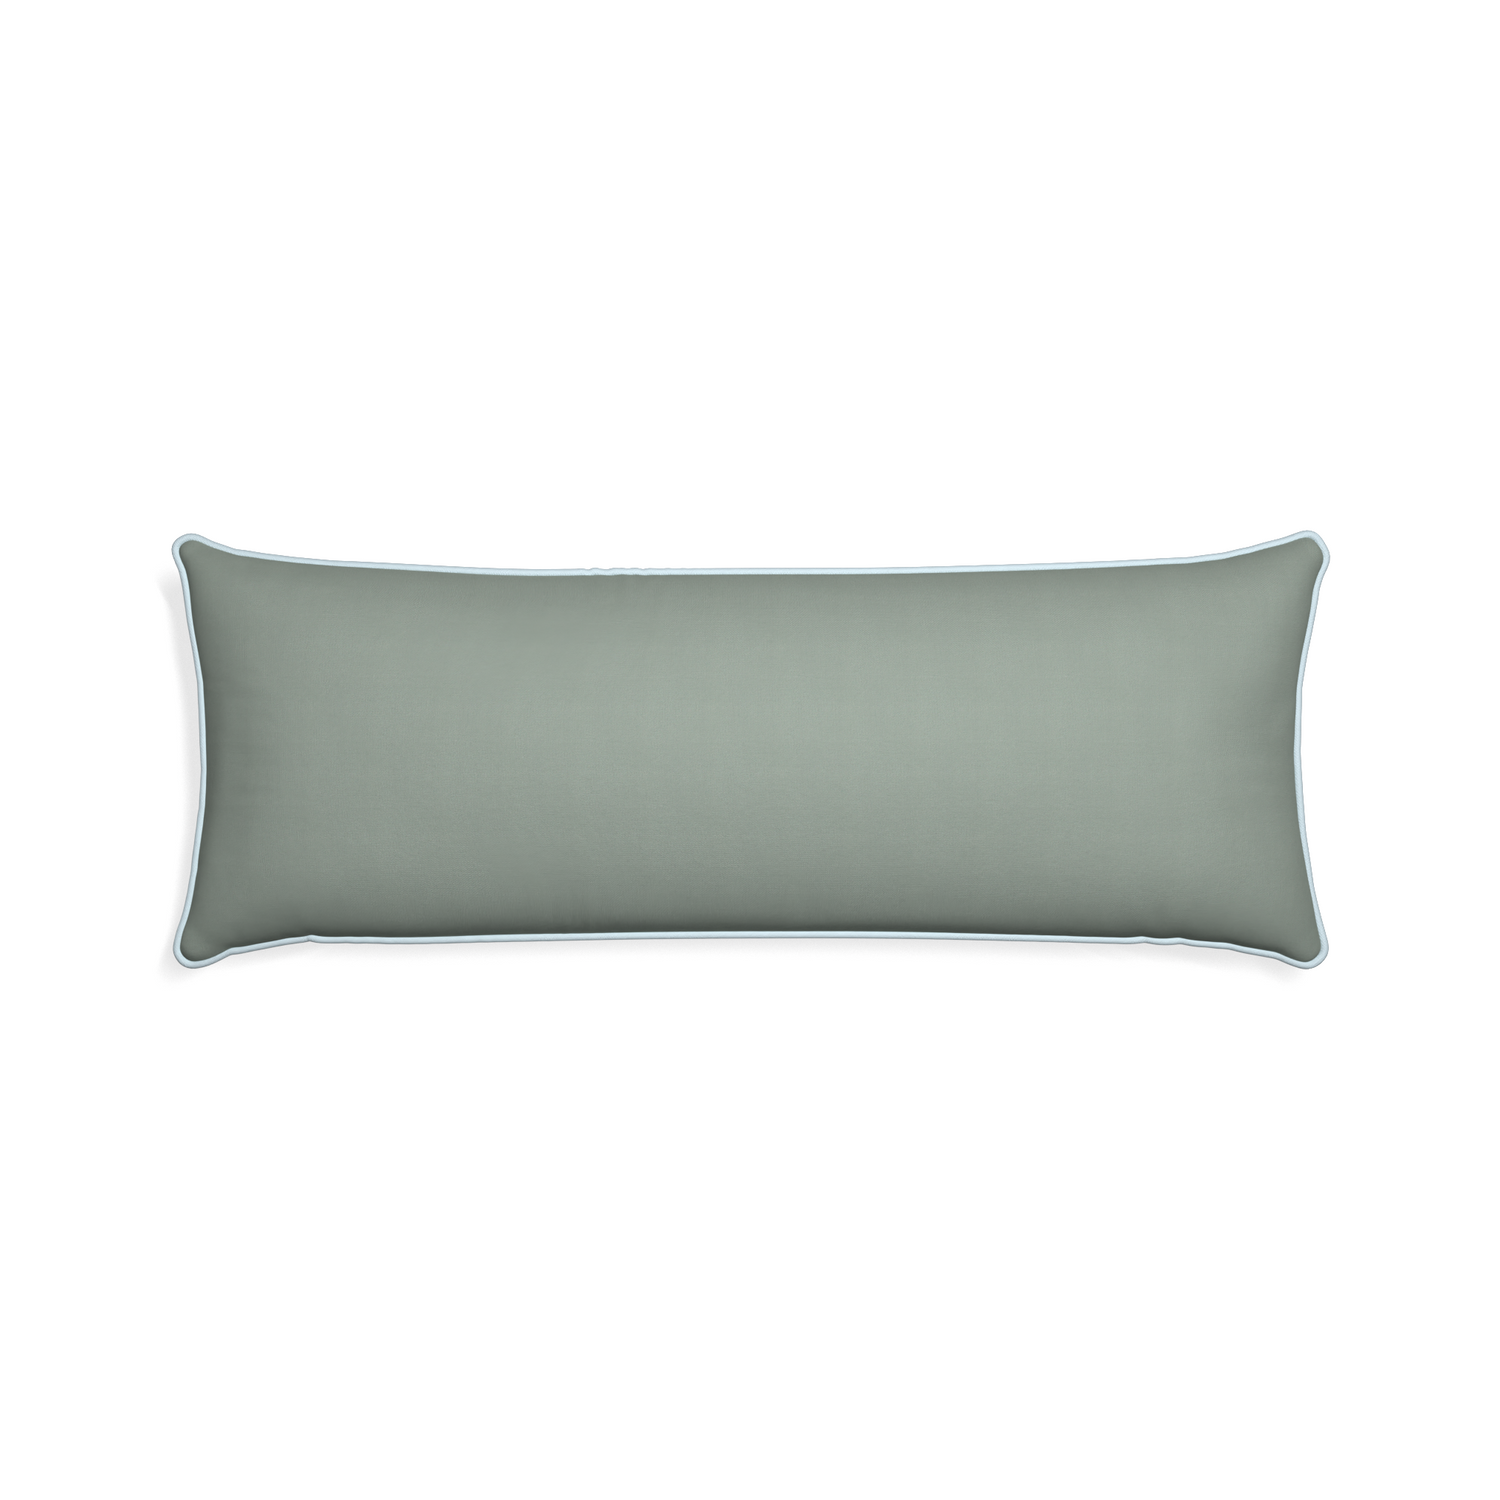 Xl-lumbar sage custom pillow with powder piping on white background